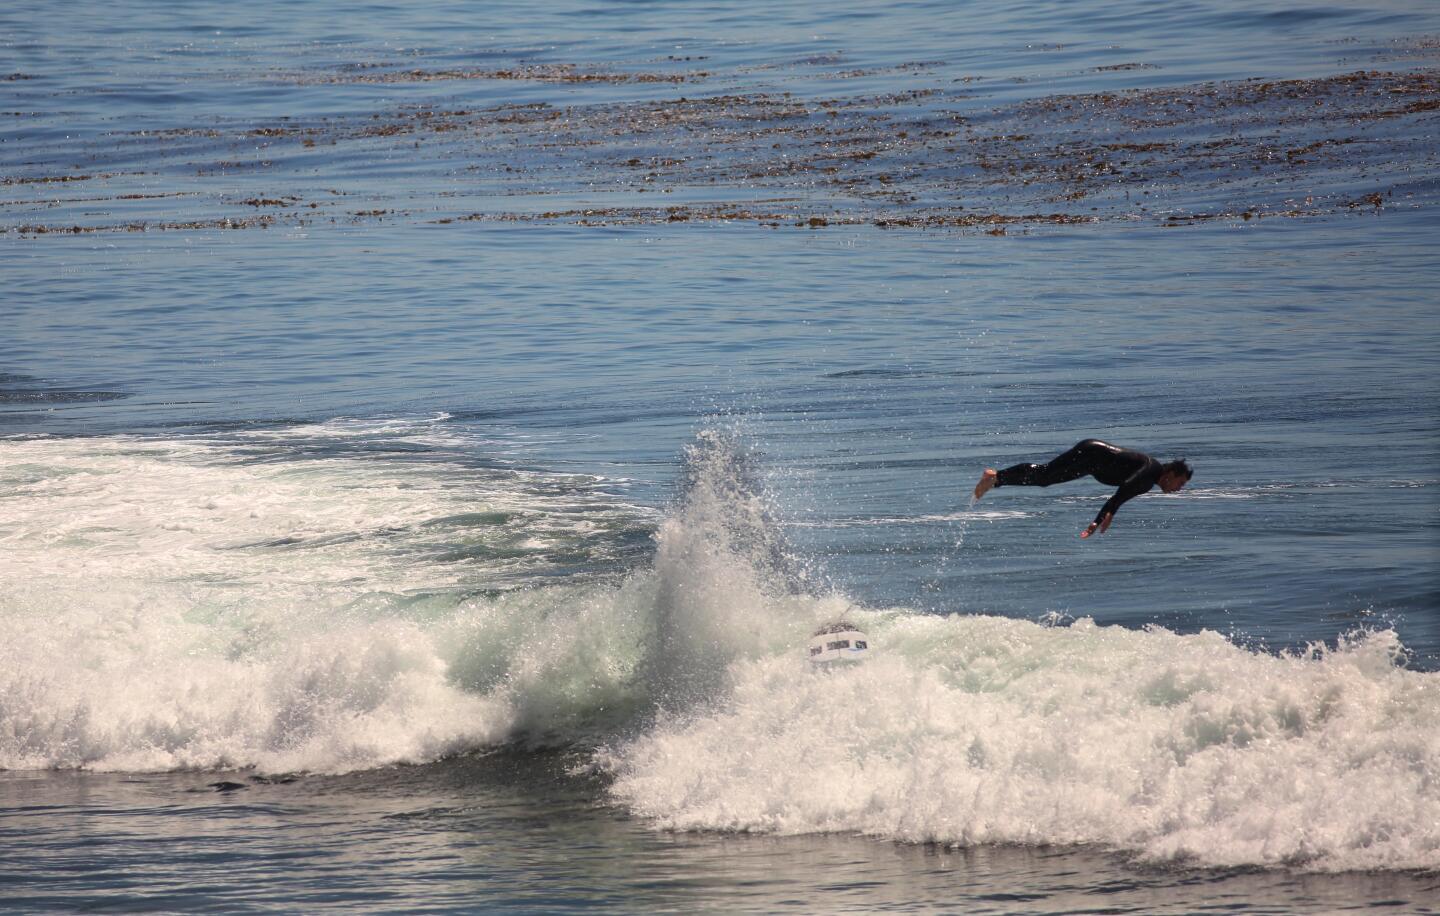 A surfer hangs ten and a bit more while catching waves as some tried to regain some semblance of normality during days of the coronavirus pandemic at Point Mugu State Park in Ventura County Ventura on Wednesday, April 15, 2020. Point Mugu State Park has been temporarily closed since April 7 in an effort to prevent visitation surges to help stop the spread of the coronavirus. (Genaro Molina / Los Angeles Times)